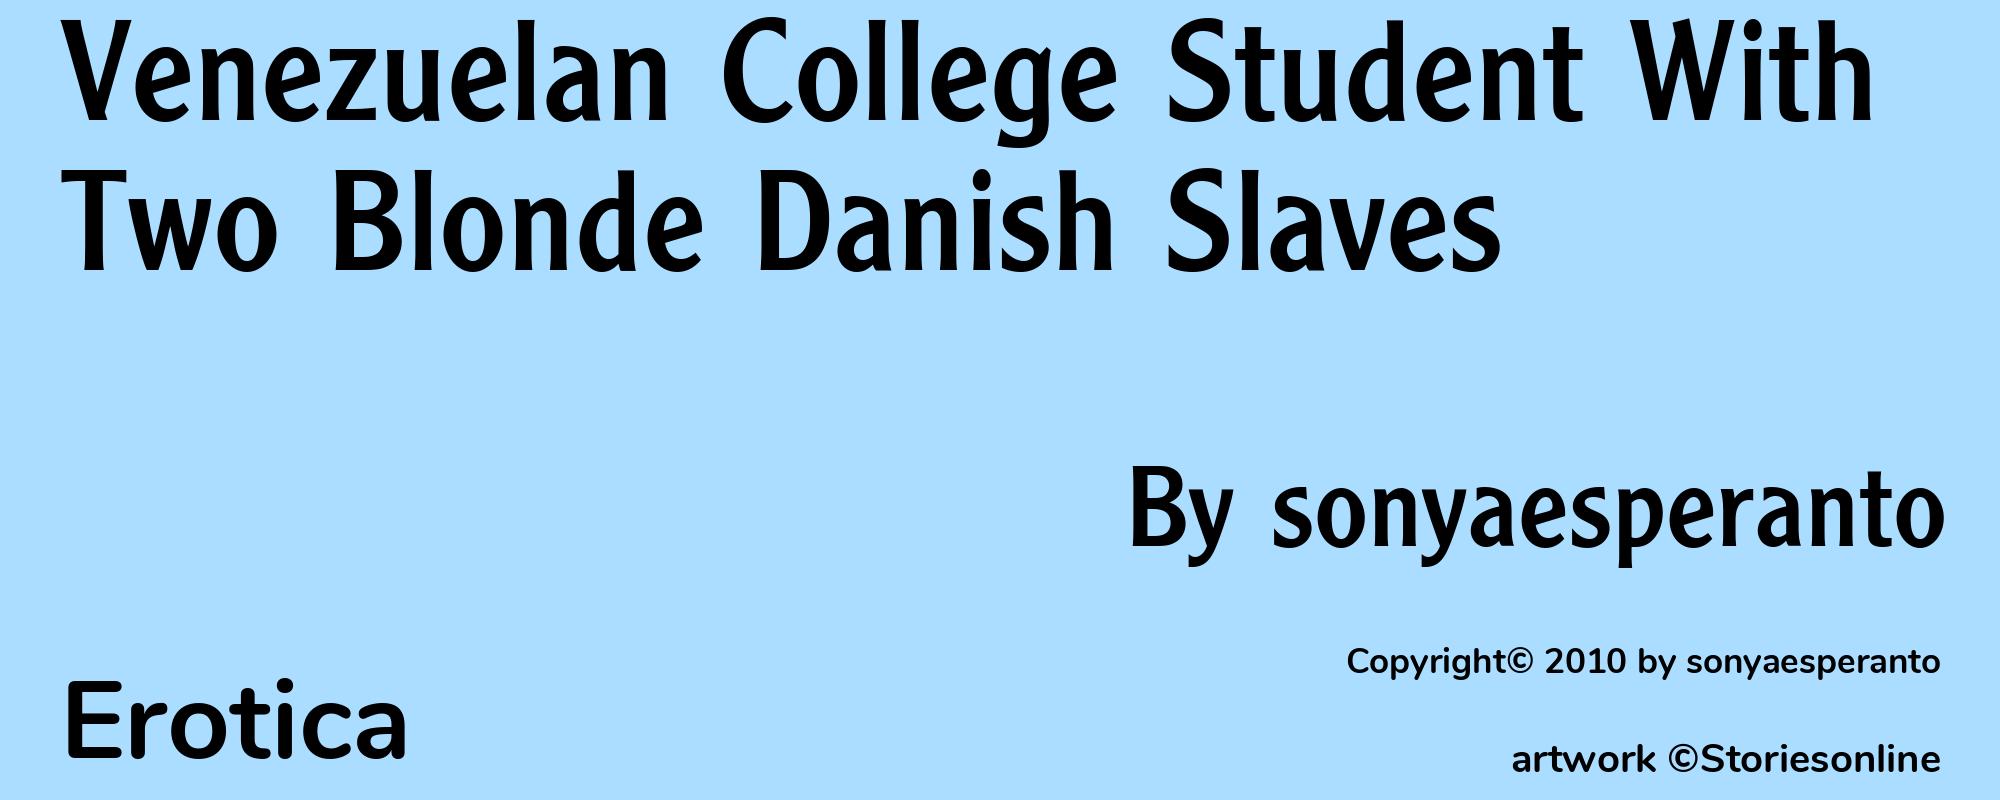 Venezuelan College Student With Two Blonde Danish Slaves - Cover